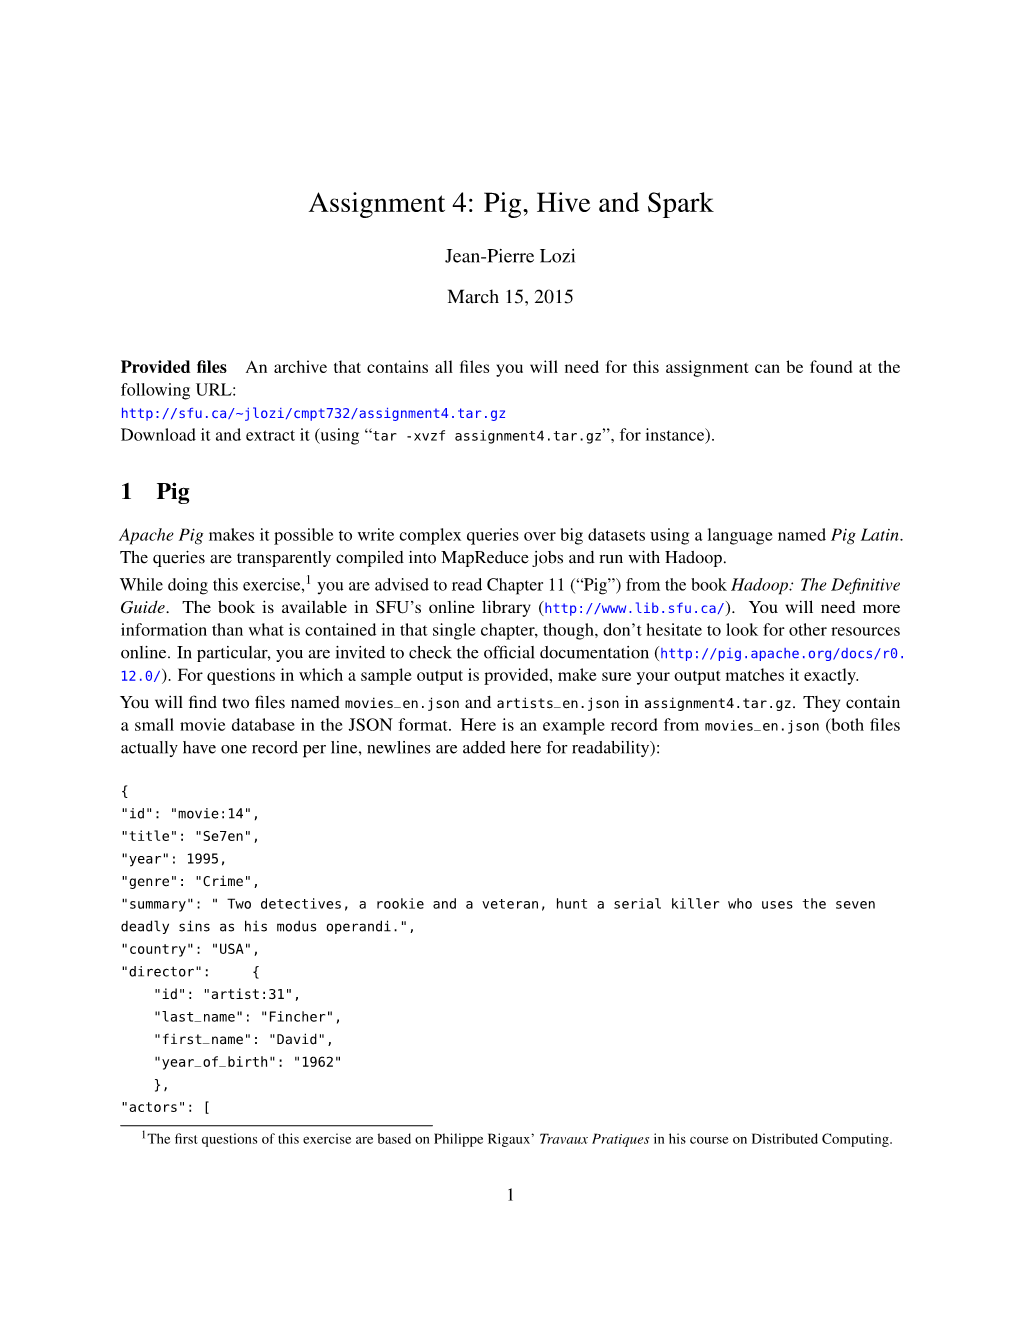 Assignment 4: Pig, Hive and Spark